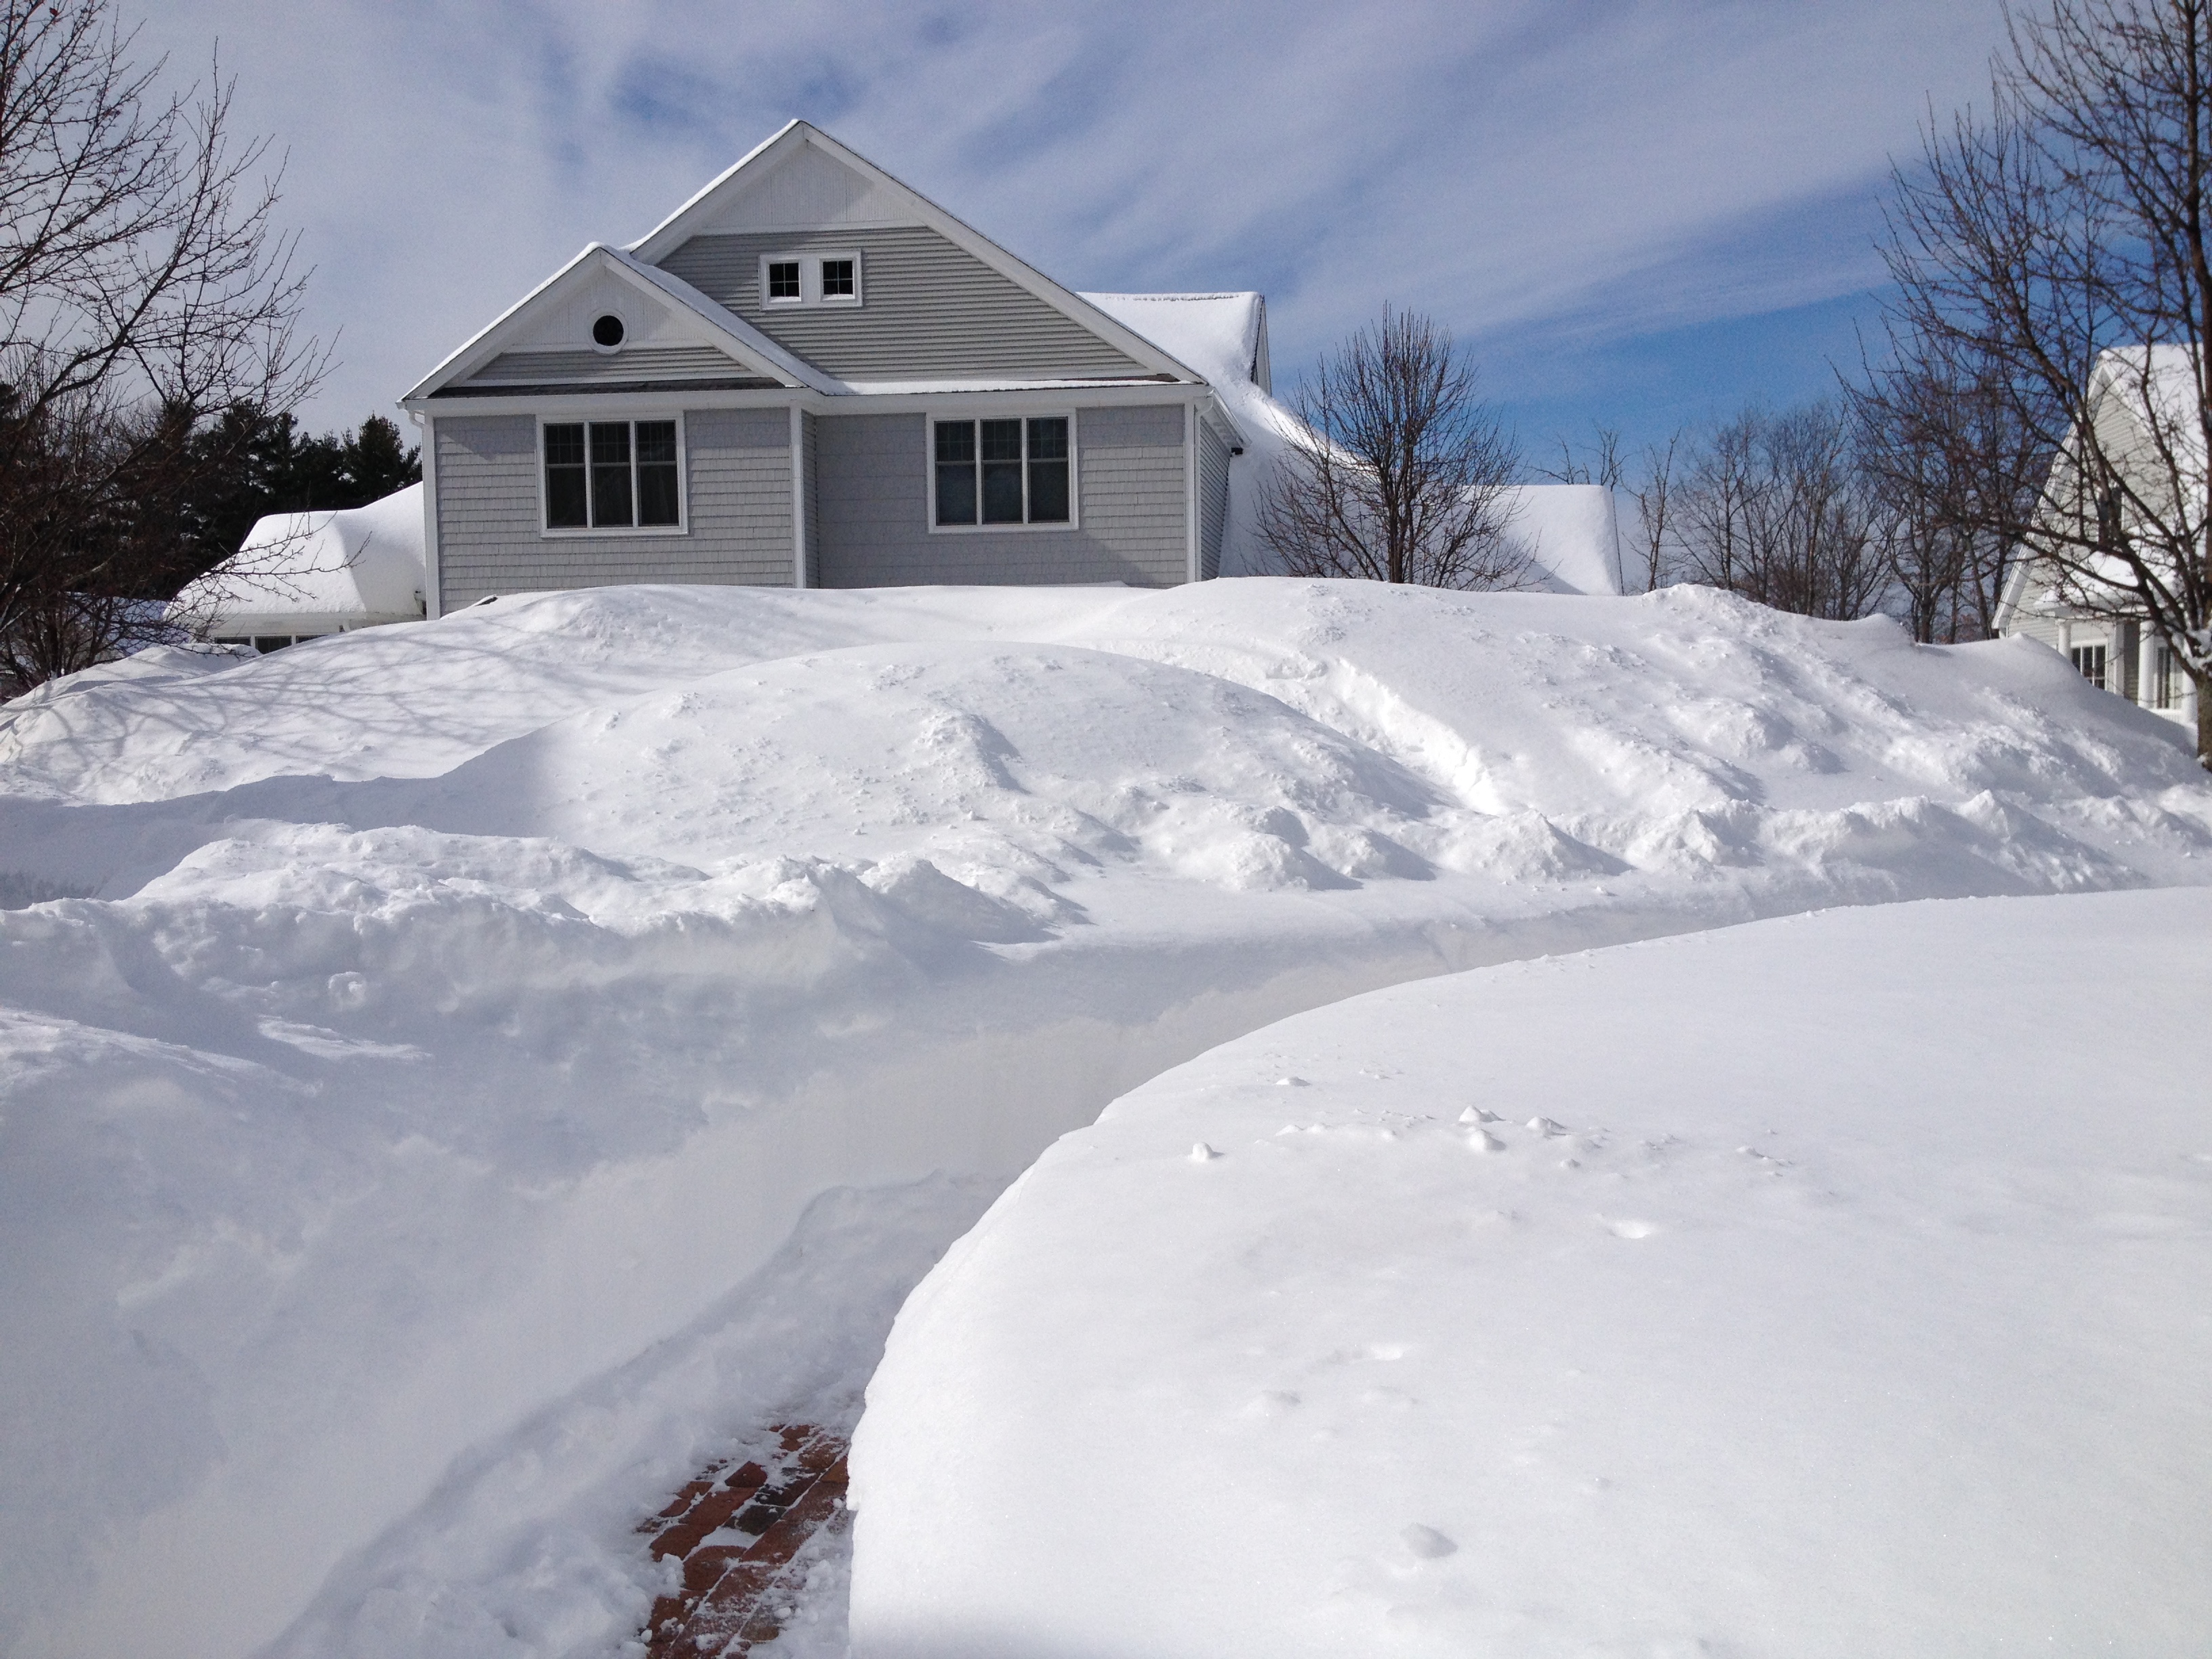 My front yard in Massachusetts after 54 inches of snow